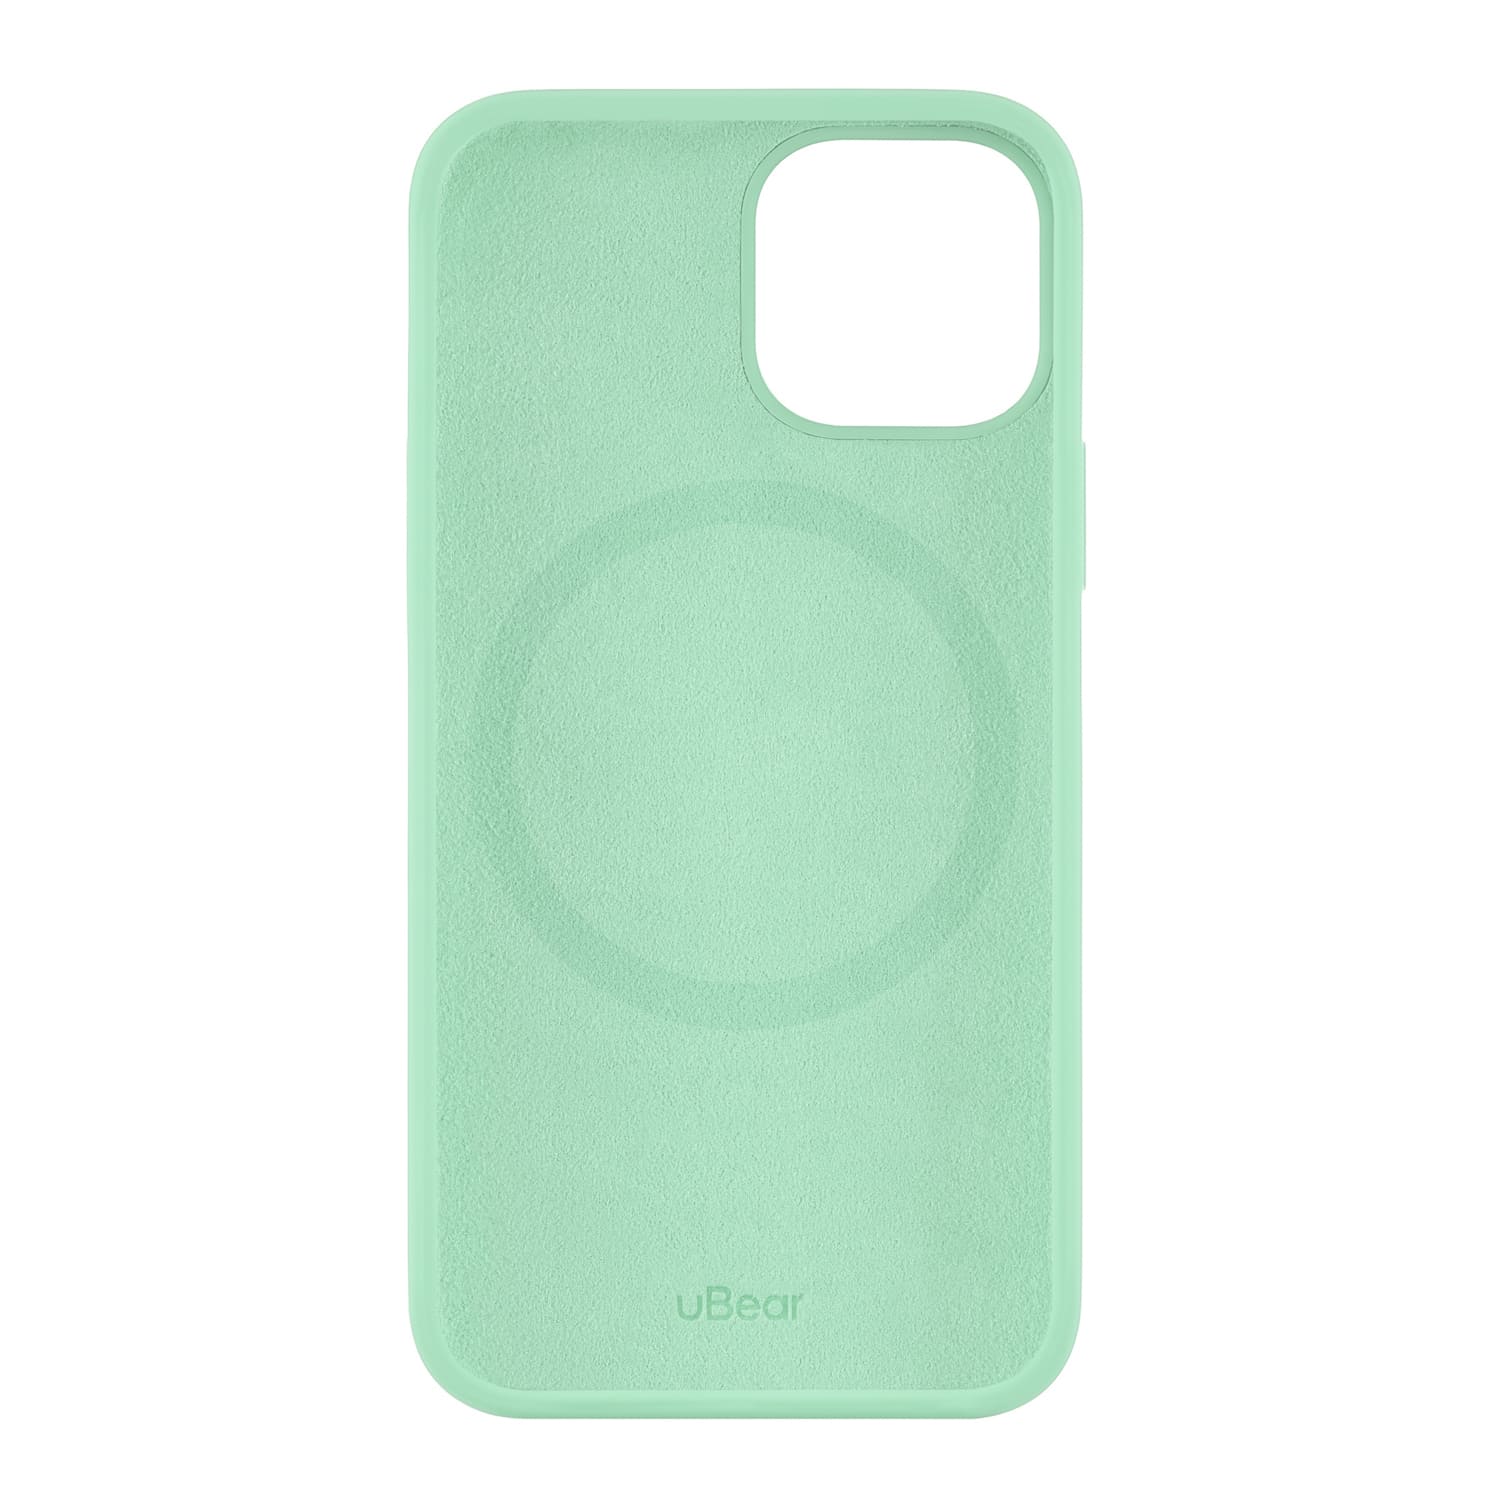 Touch Mag Сase (Liquid silicone) for iPhone 13 MagSafe Compatible. Магнитная упаковка, зелёный